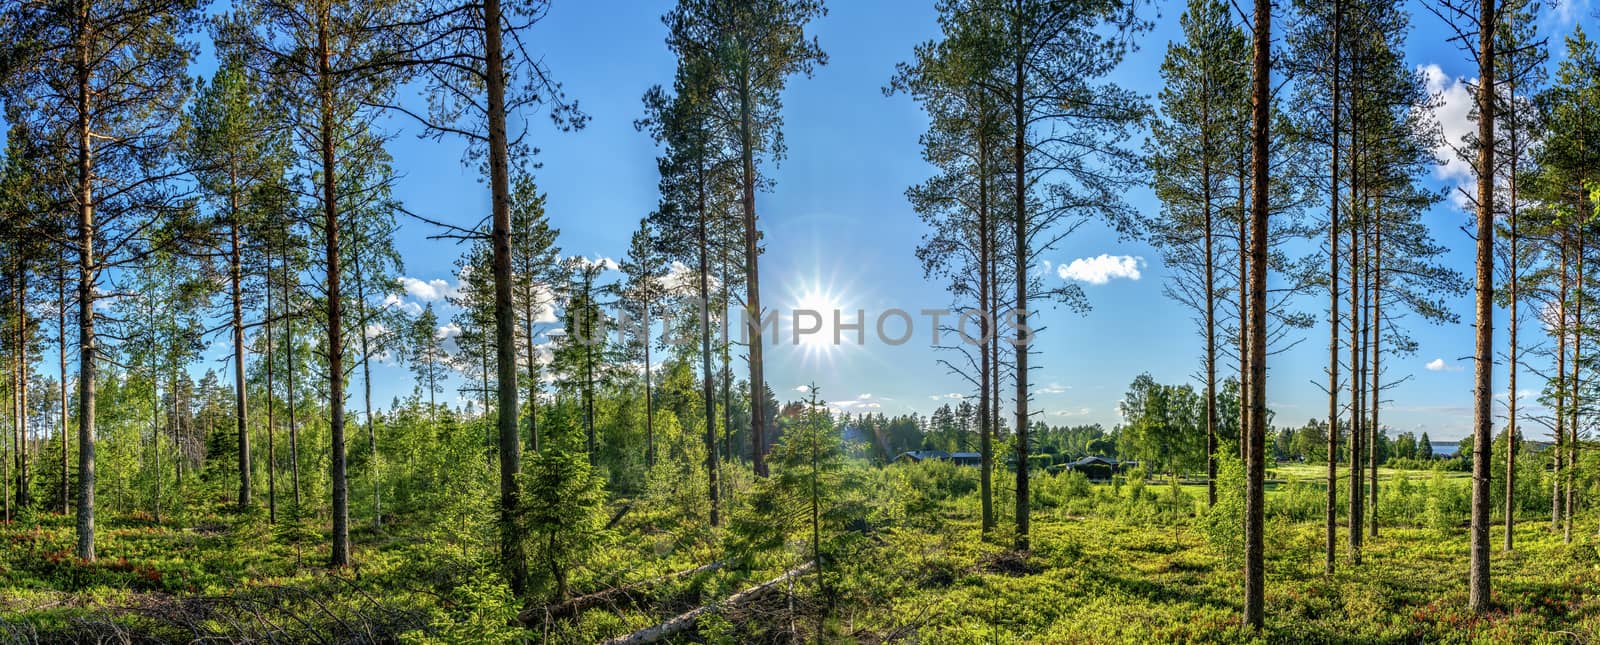 Beautiful view at small Scandinavian village from inside of Swedish forest through green forest trees under Sun rays. Scenic background picture of Scandinavian summer nature. by skydreamliner